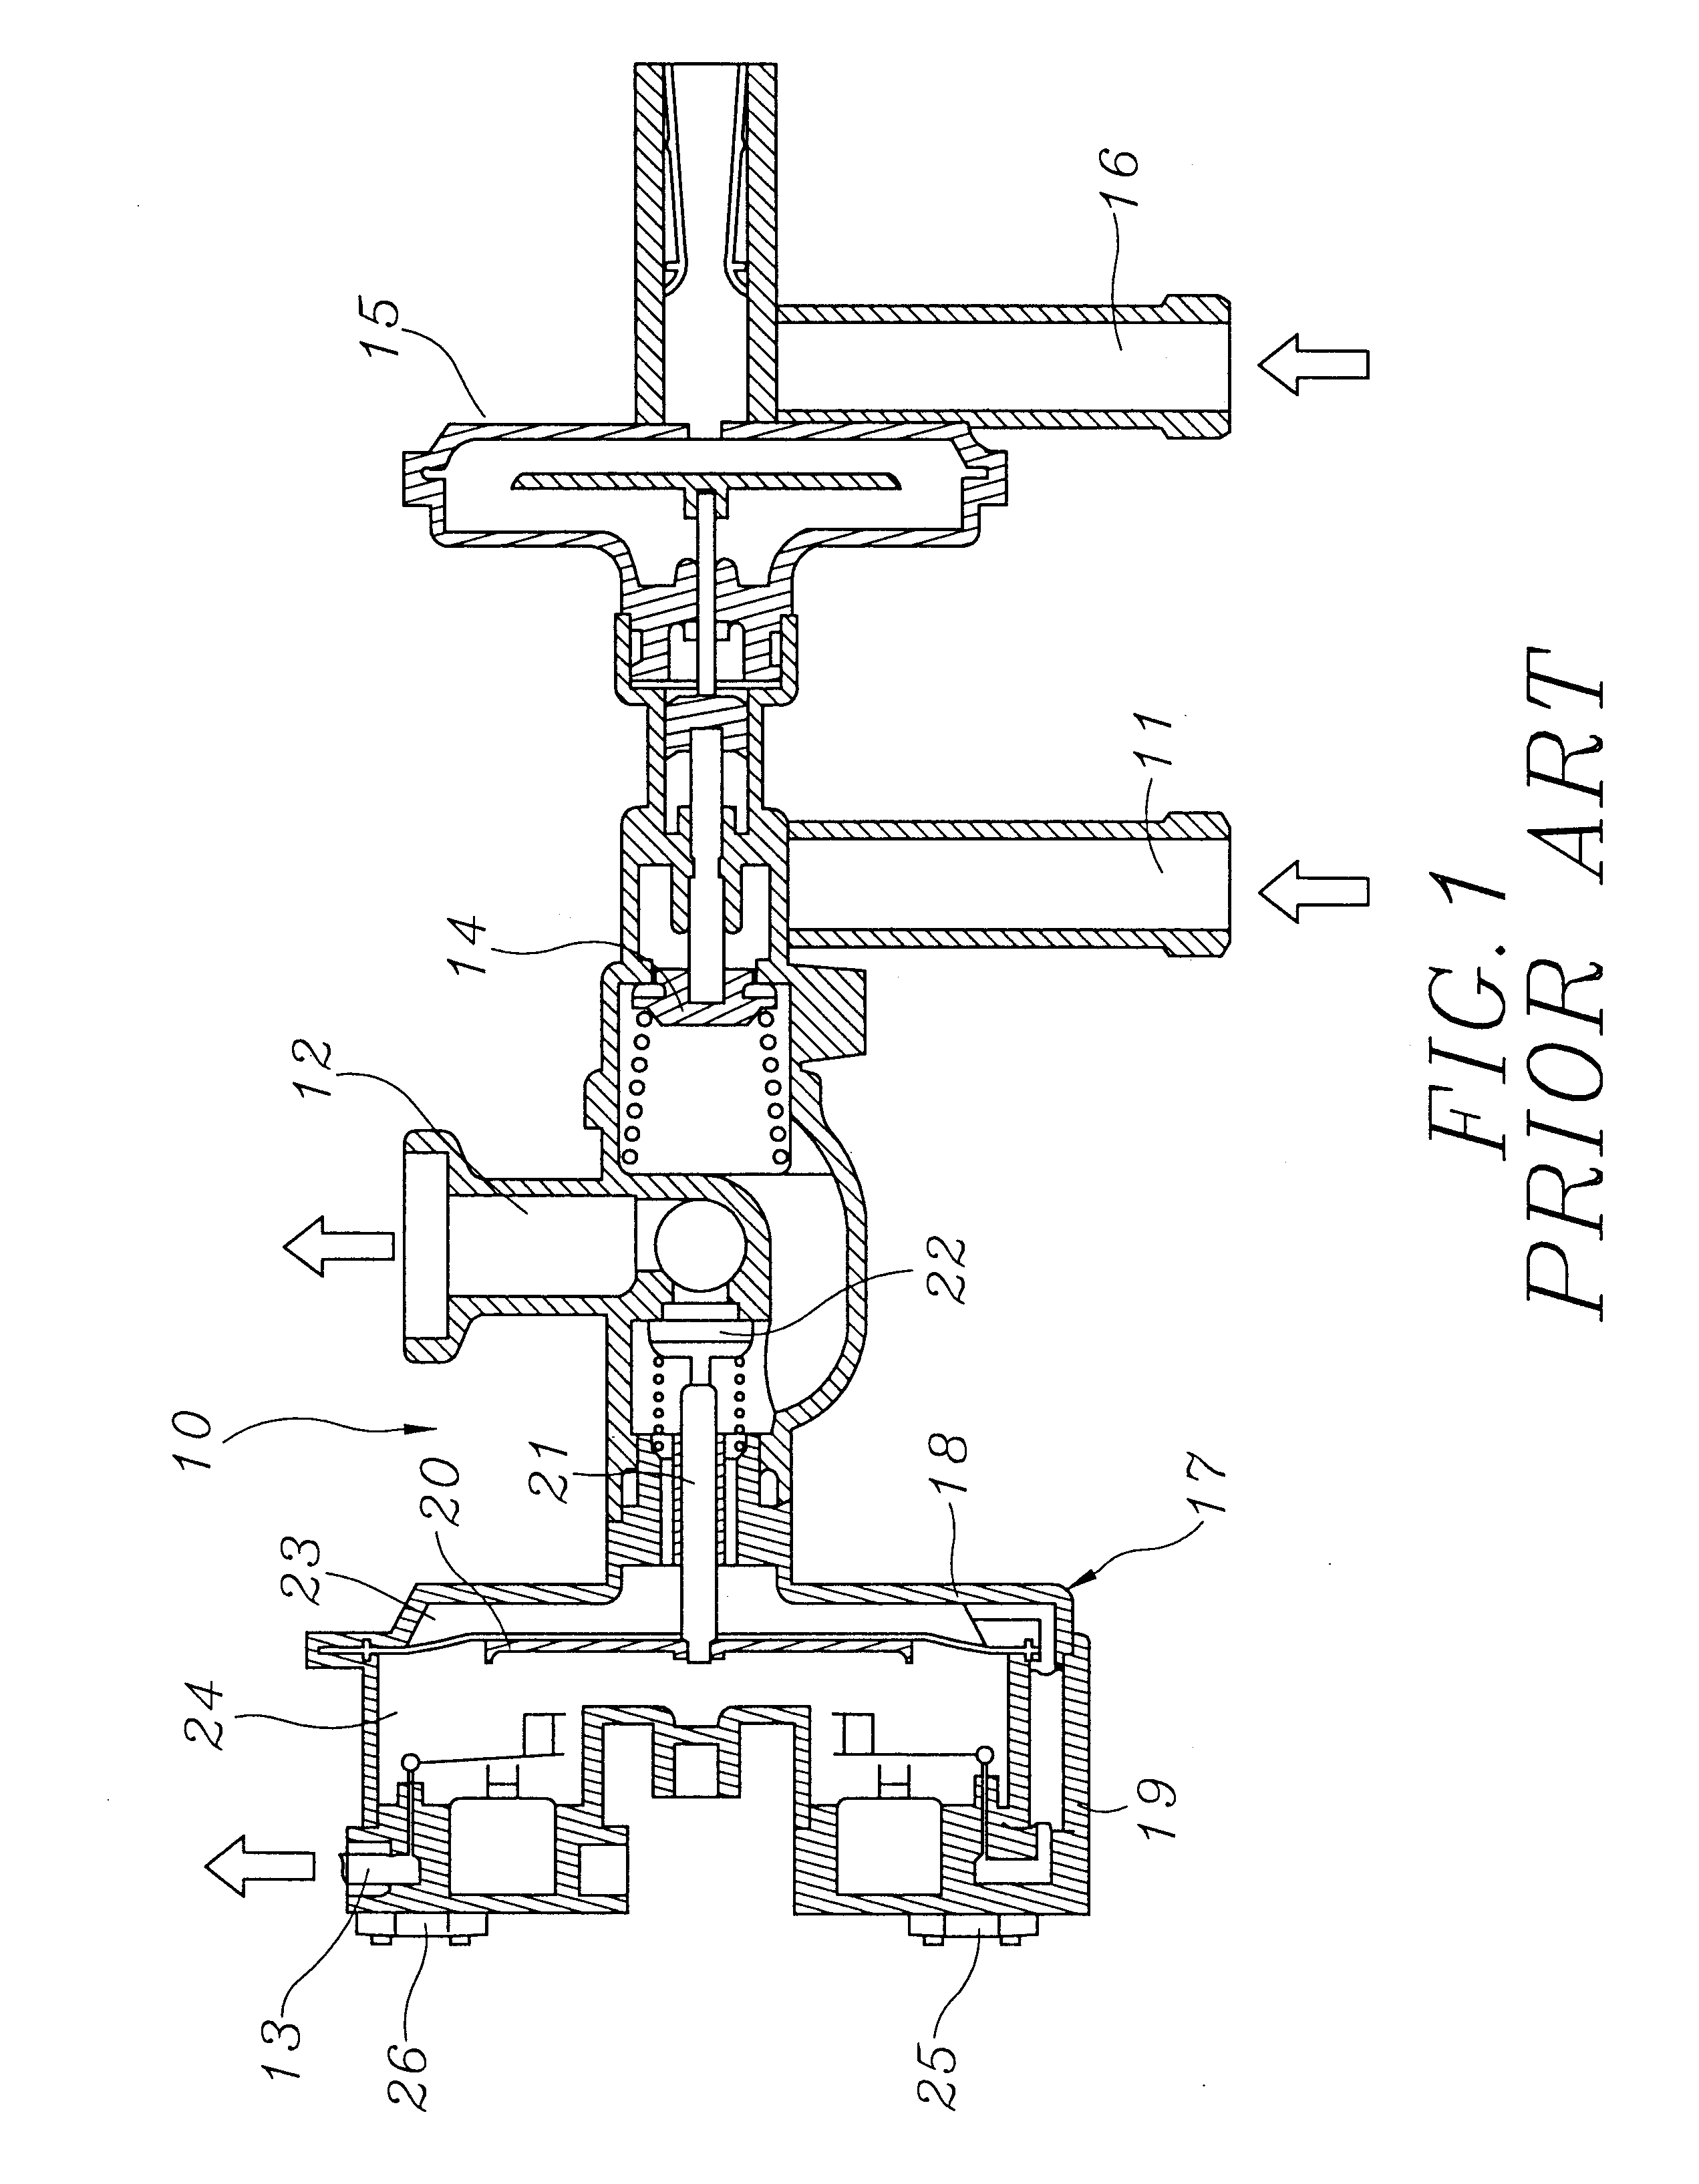 Control method of thermostatic system